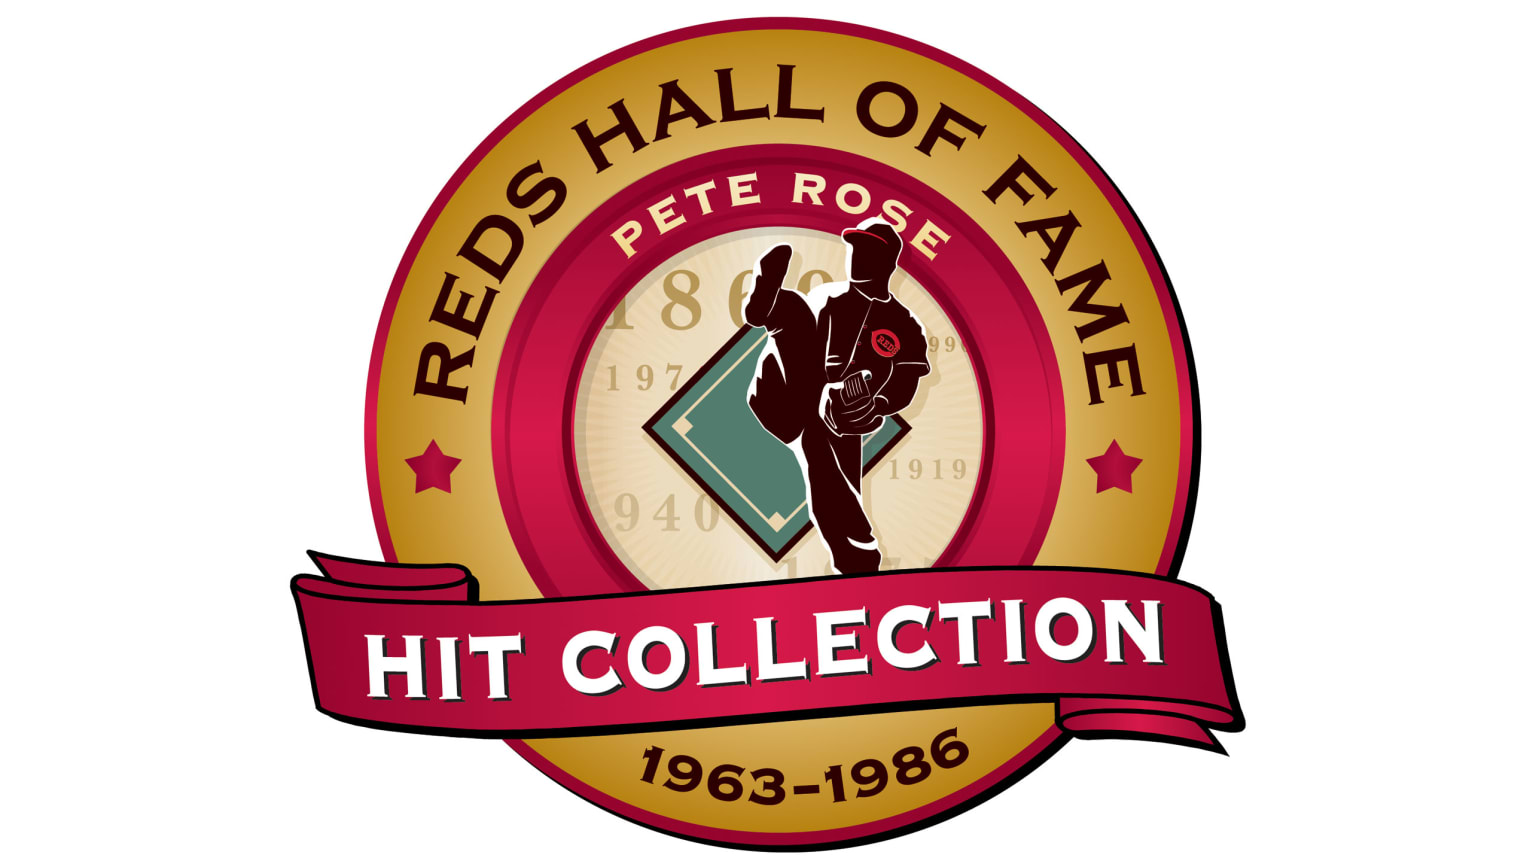 New Reds Threads exhibit opens today at Reds HOF